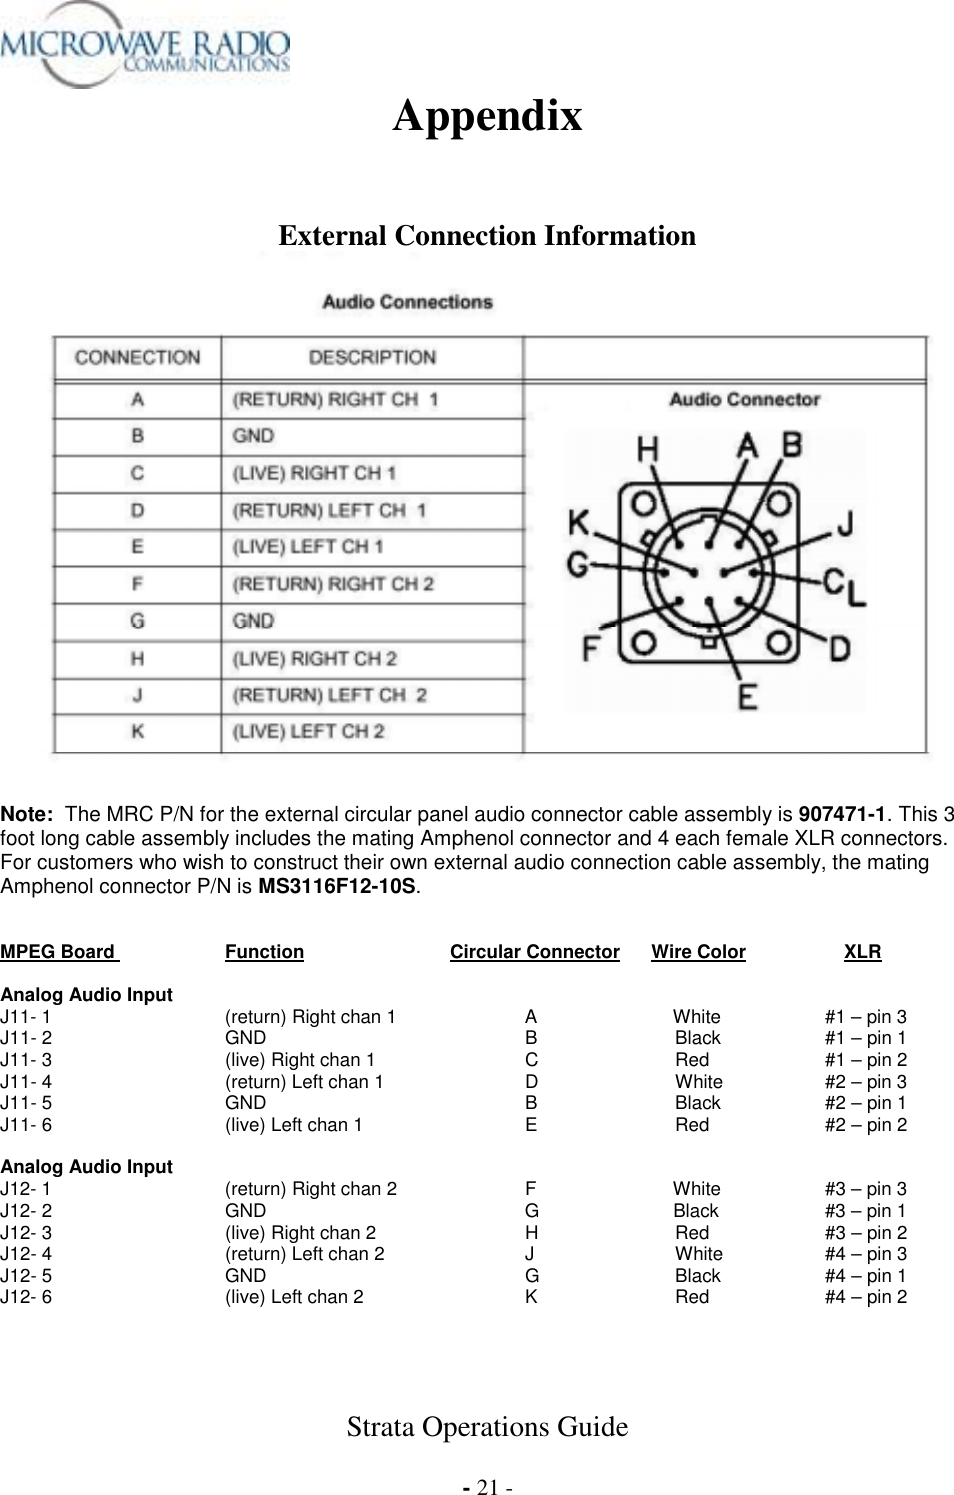  Strata Operations Guide  - 21 - Appendix  External Connection Information   Note:  The MRC P/N for the external circular panel audio connector cable assembly is 907471-1. This 3 foot long cable assembly includes the mating Amphenol connector and 4 each female XLR connectors.  For customers who wish to construct their own external audio connection cable assembly, the mating Amphenol connector P/N is MS3116F12-10S.   MPEG Board    Function   Circular Connector      Wire Color                   XLR   Analog Audio Input J11- 1       (return) Right chan 1    A                White    #1 – pin 3 J11- 2   GND    B  Black  #1 – pin 1 J11- 3   (live) Right chan 1  C  Red  #1 – pin 2  J11- 4   (return) Left chan 1  D  White  #2 – pin 3 J11- 5   GND    B  Black  #2 – pin 1 J11- 6   (live) Left chan 1   E  Red  #2 – pin 2  Analog Audio Input J12- 1      (return) Right chan 2           F                White    #3 – pin 3 J12- 2      GND        G                Black    #3 – pin 1 J12- 3   (live) Right chan 2  H  Red  #3 – pin 2 J12- 4   (return) Left chan 2  J  White  #4 – pin 3 J12- 5   GND    G  Black  #4 – pin 1 J12- 6    (live) Left chan 2   K  Red  #4 – pin 2     